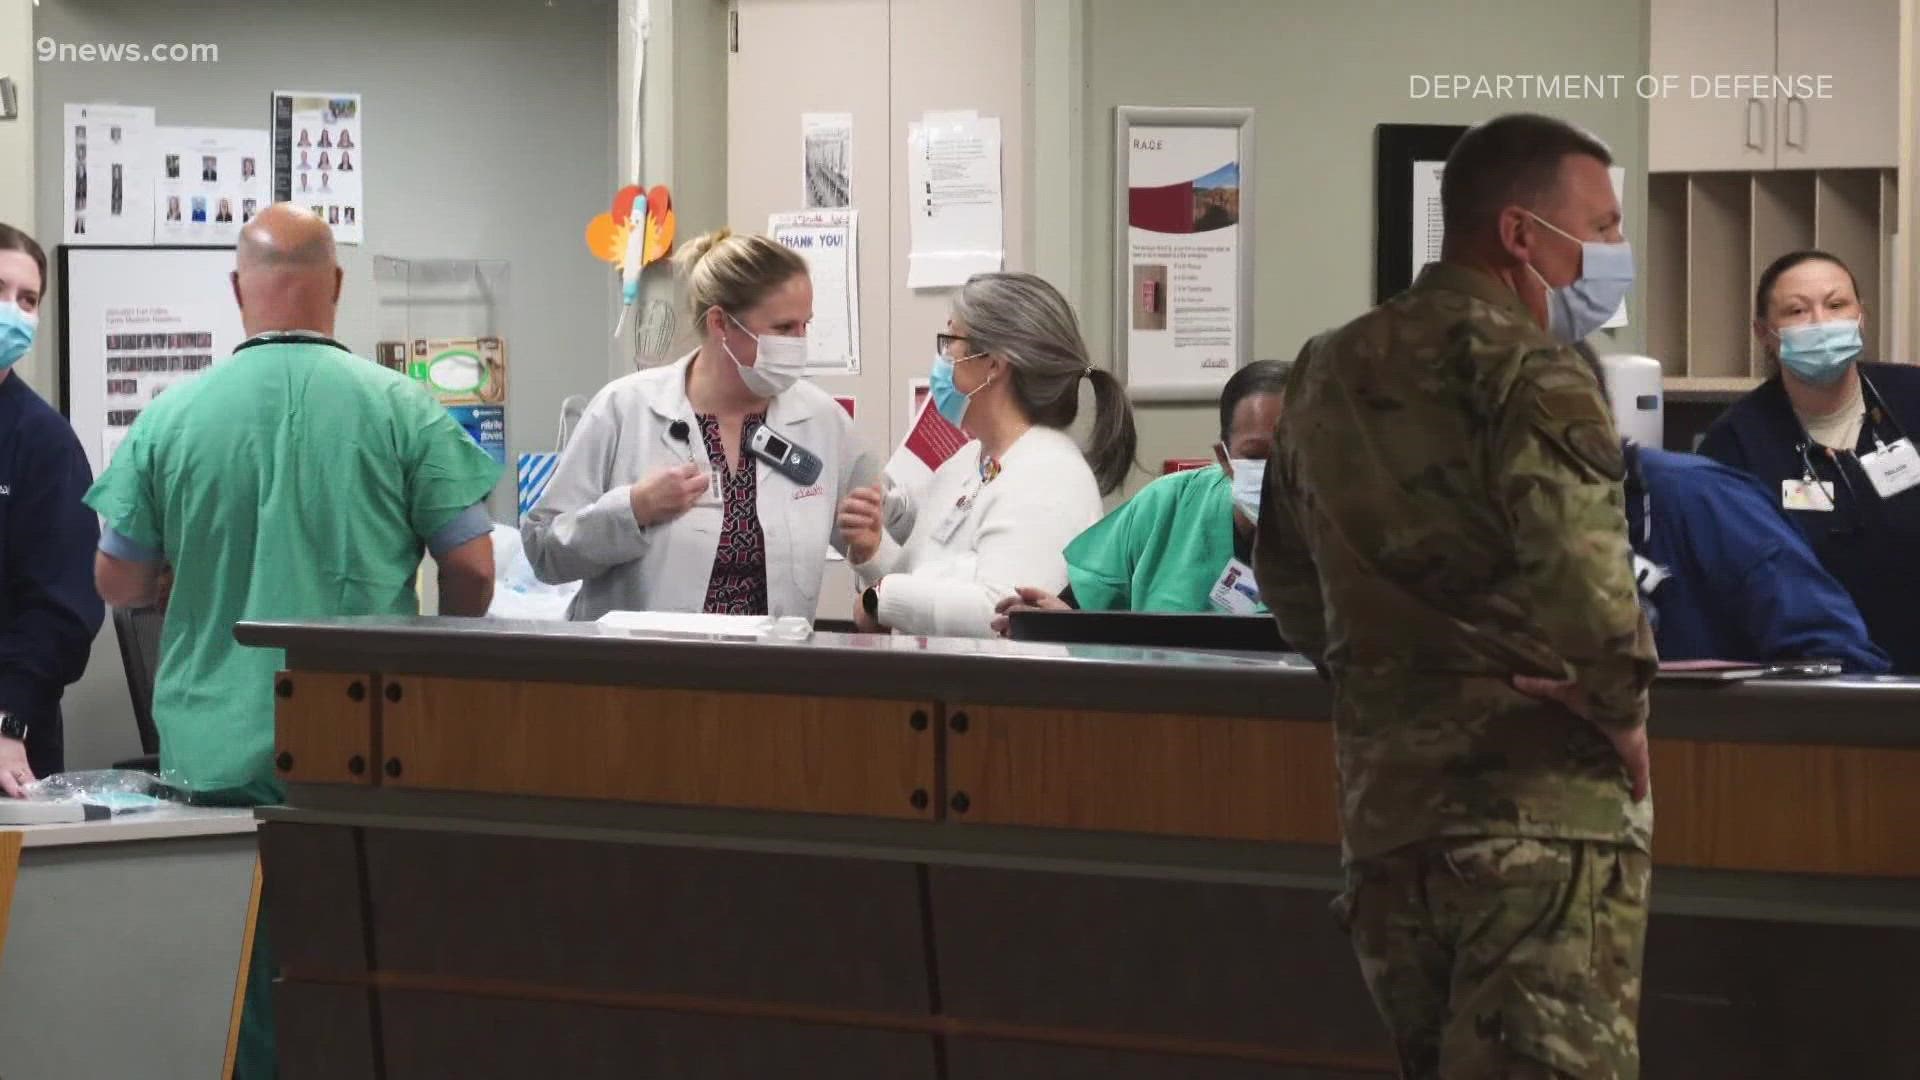 Teams from the Department of Defense have arrived at UCHealth Poudre Valley Hospital to help treat infected patients and relieve stress on doctors and nurses.